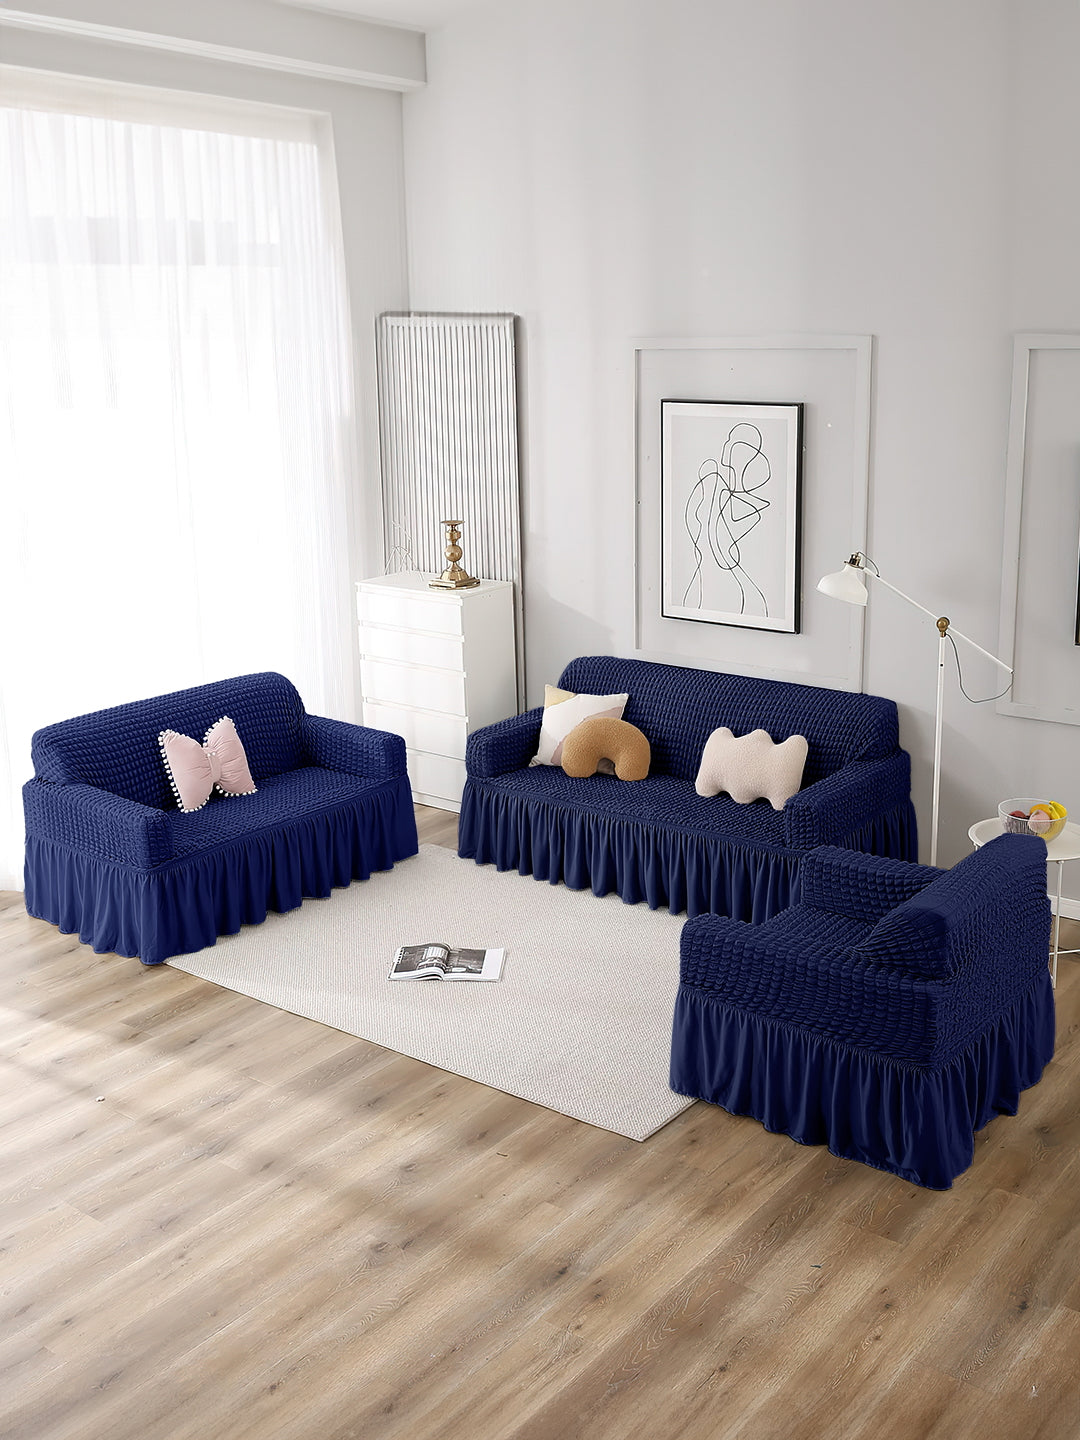 3+2 Seater Navy Blue